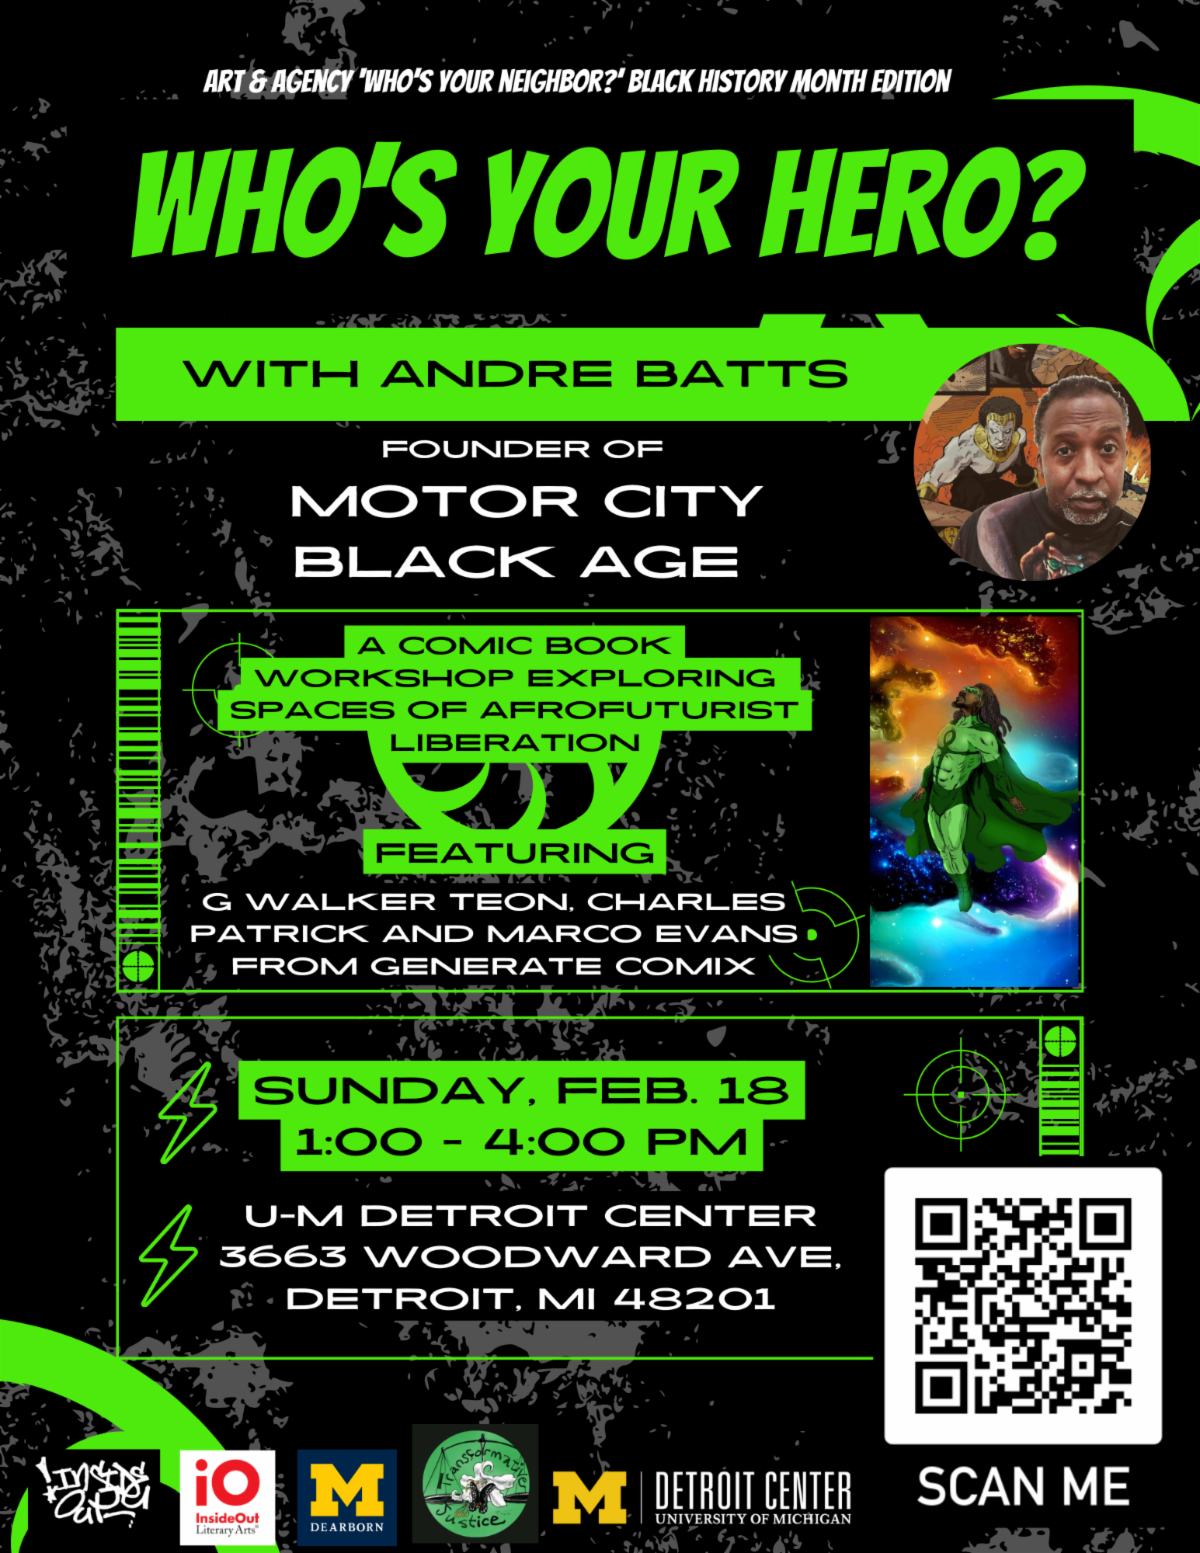 Who's Your Hero event flyer with a QR to register